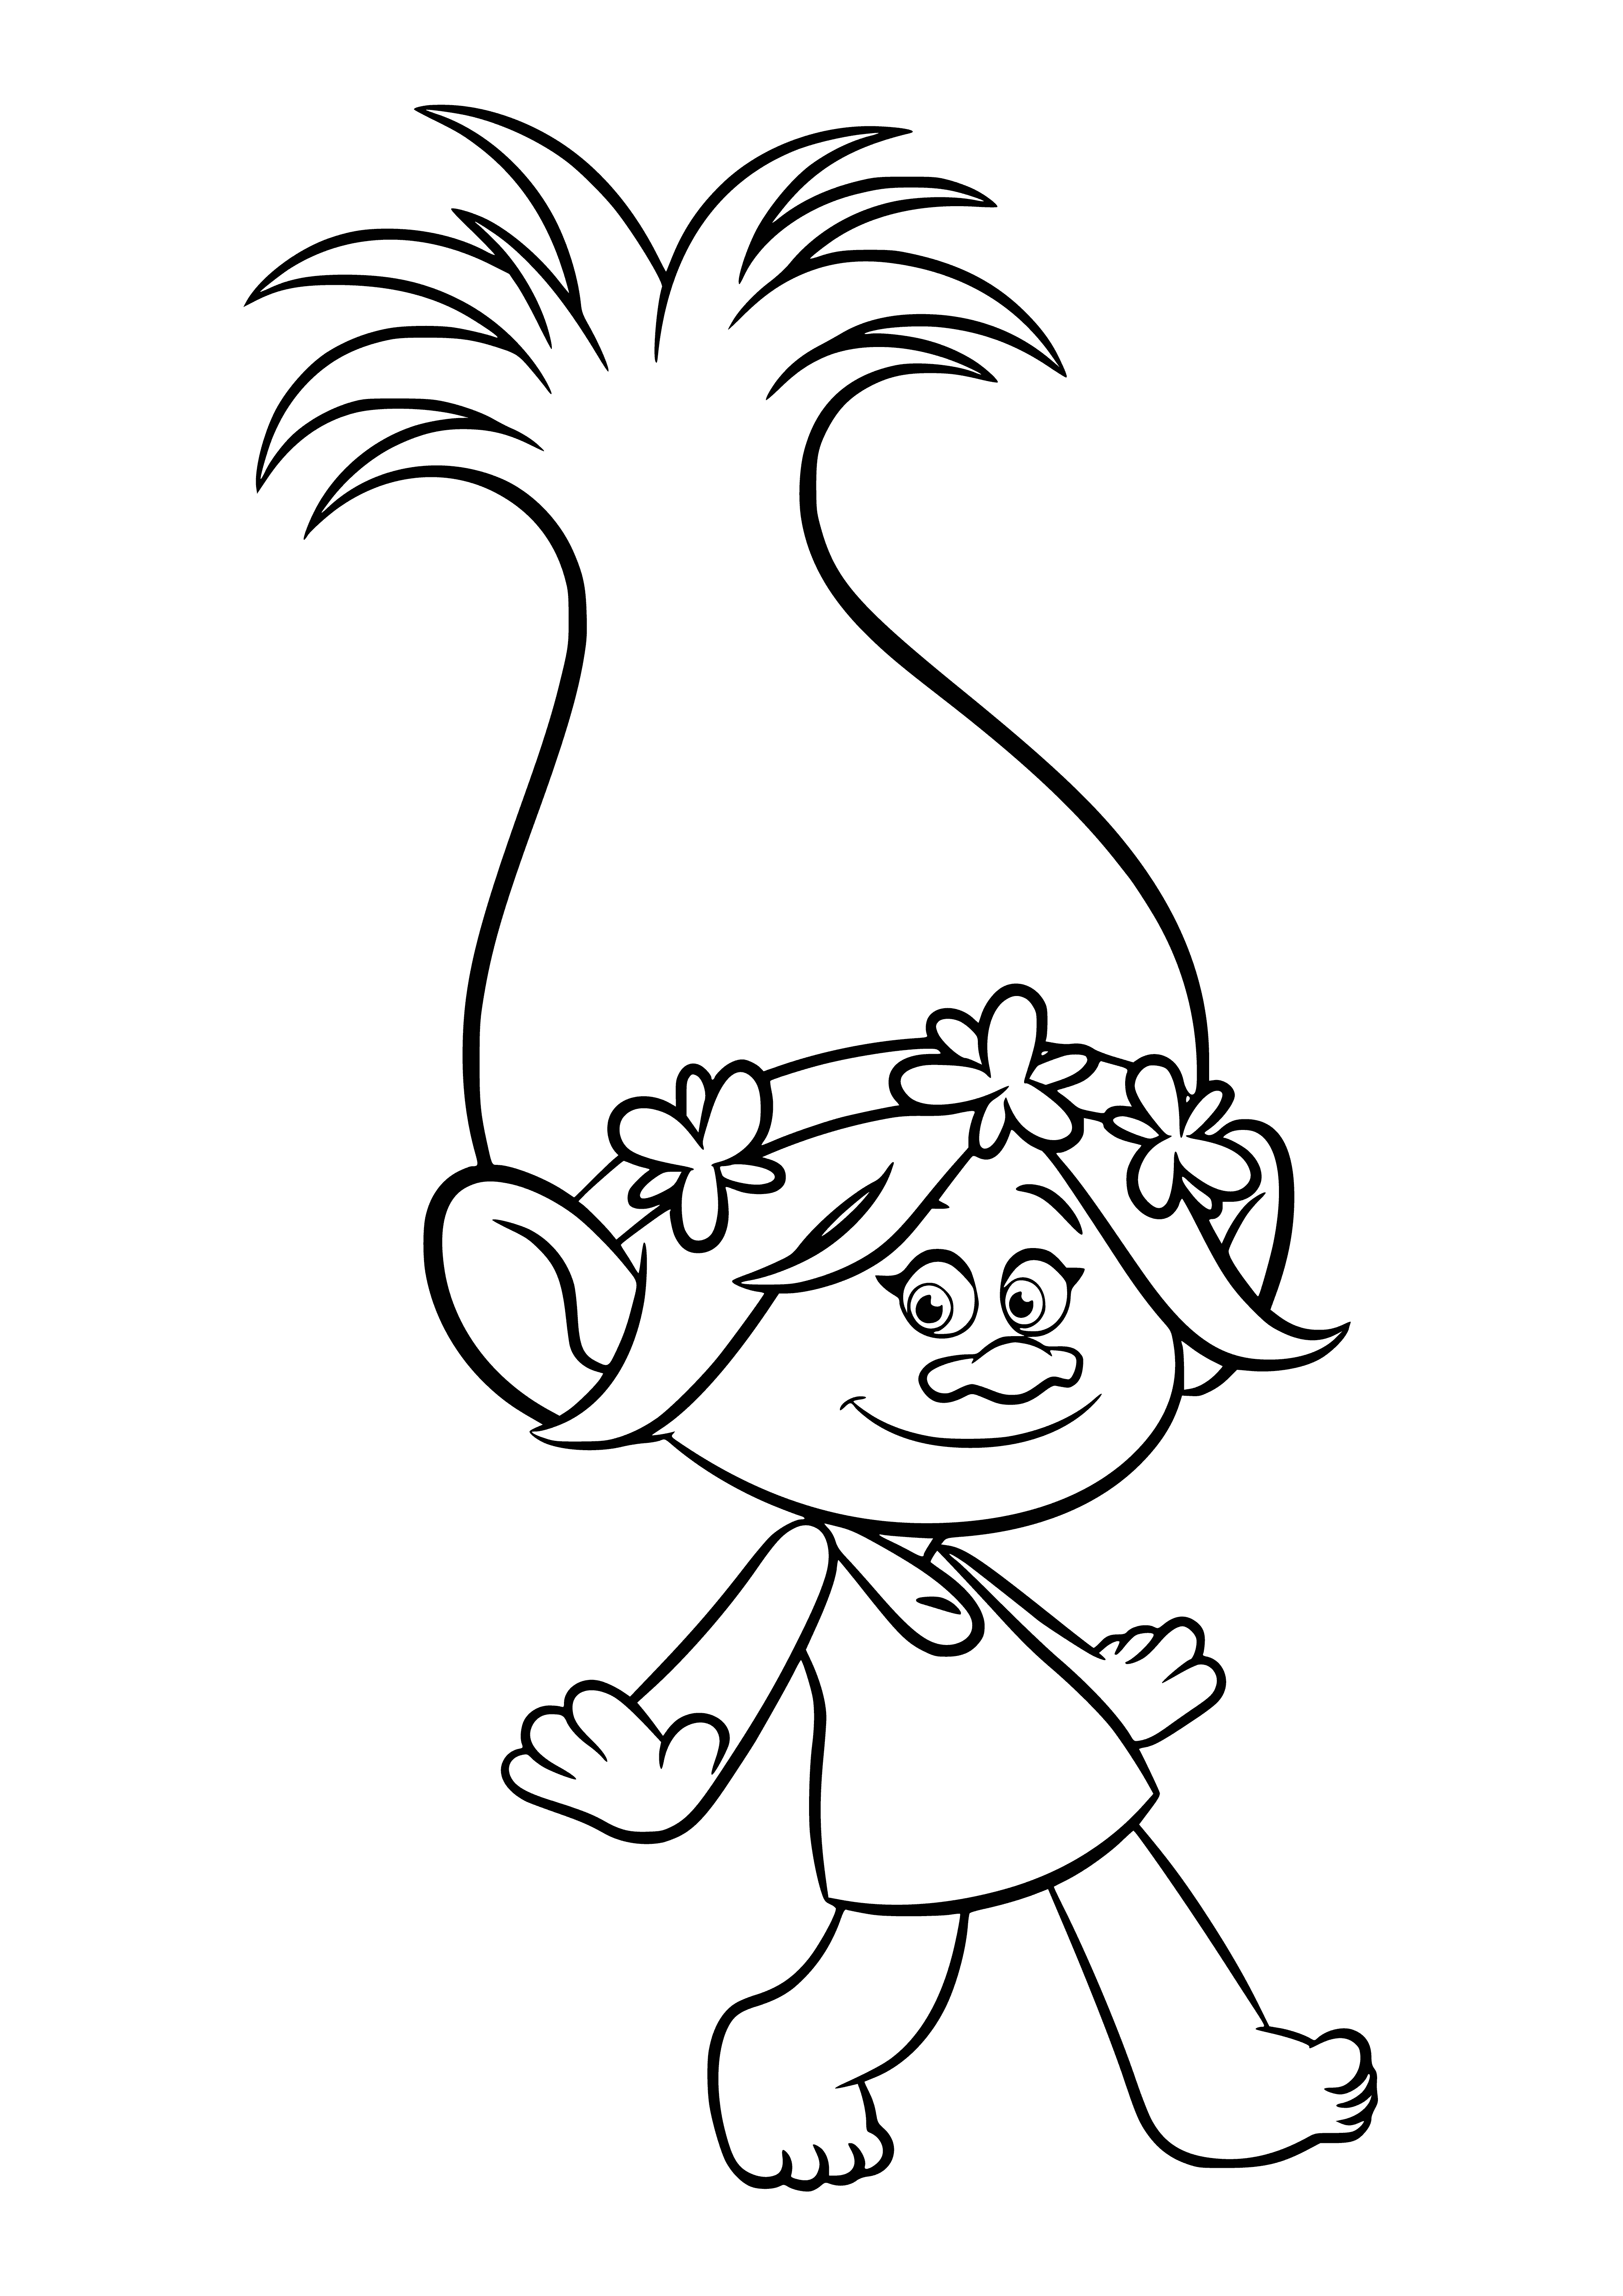 Rosette dancing coloring page